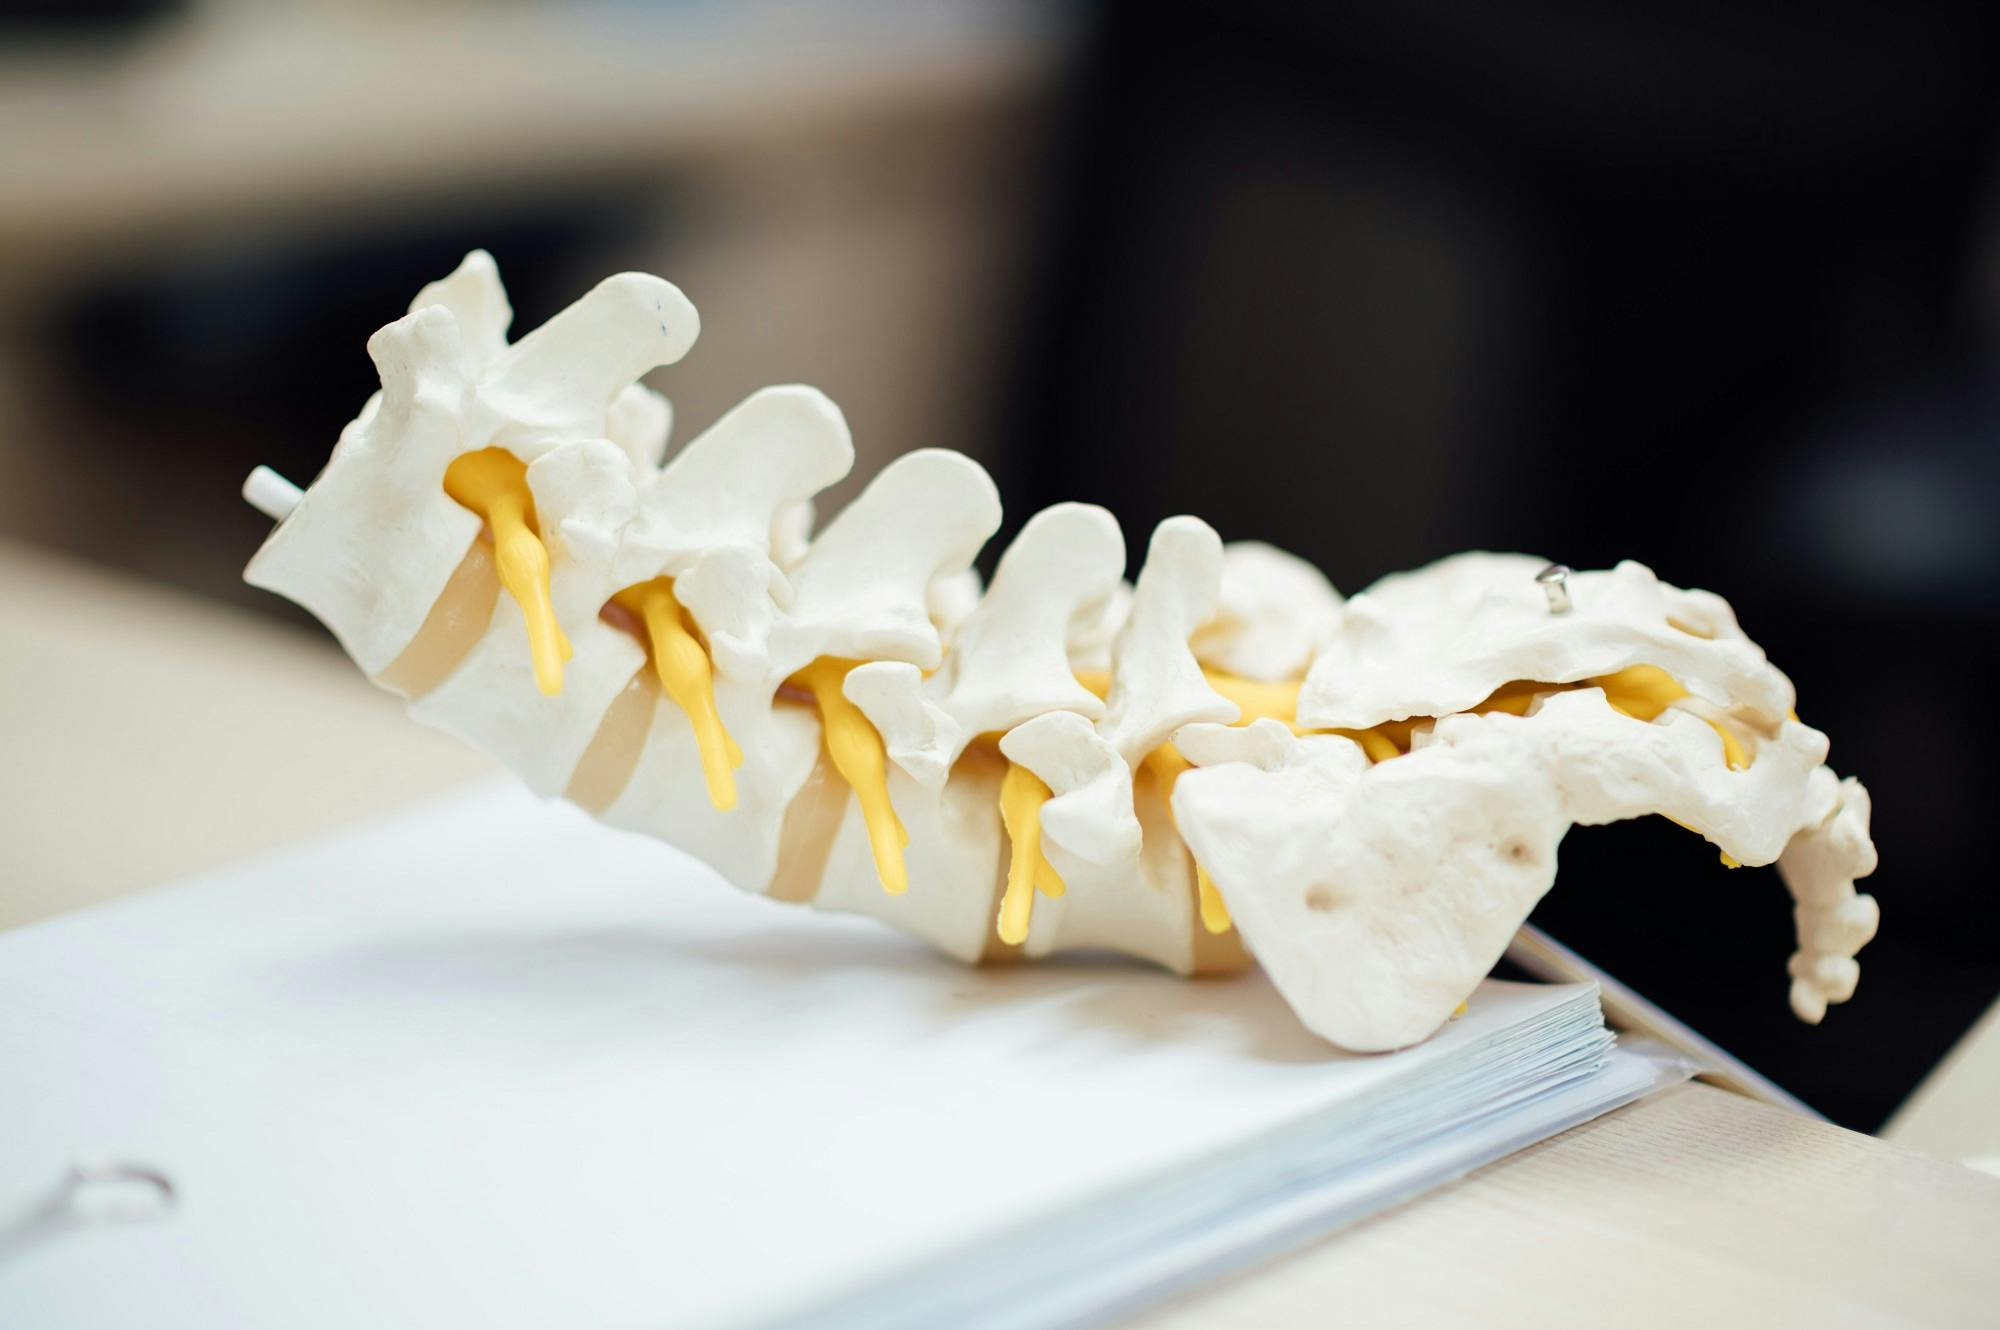 Spinal column model with intervertebral discs on documents.